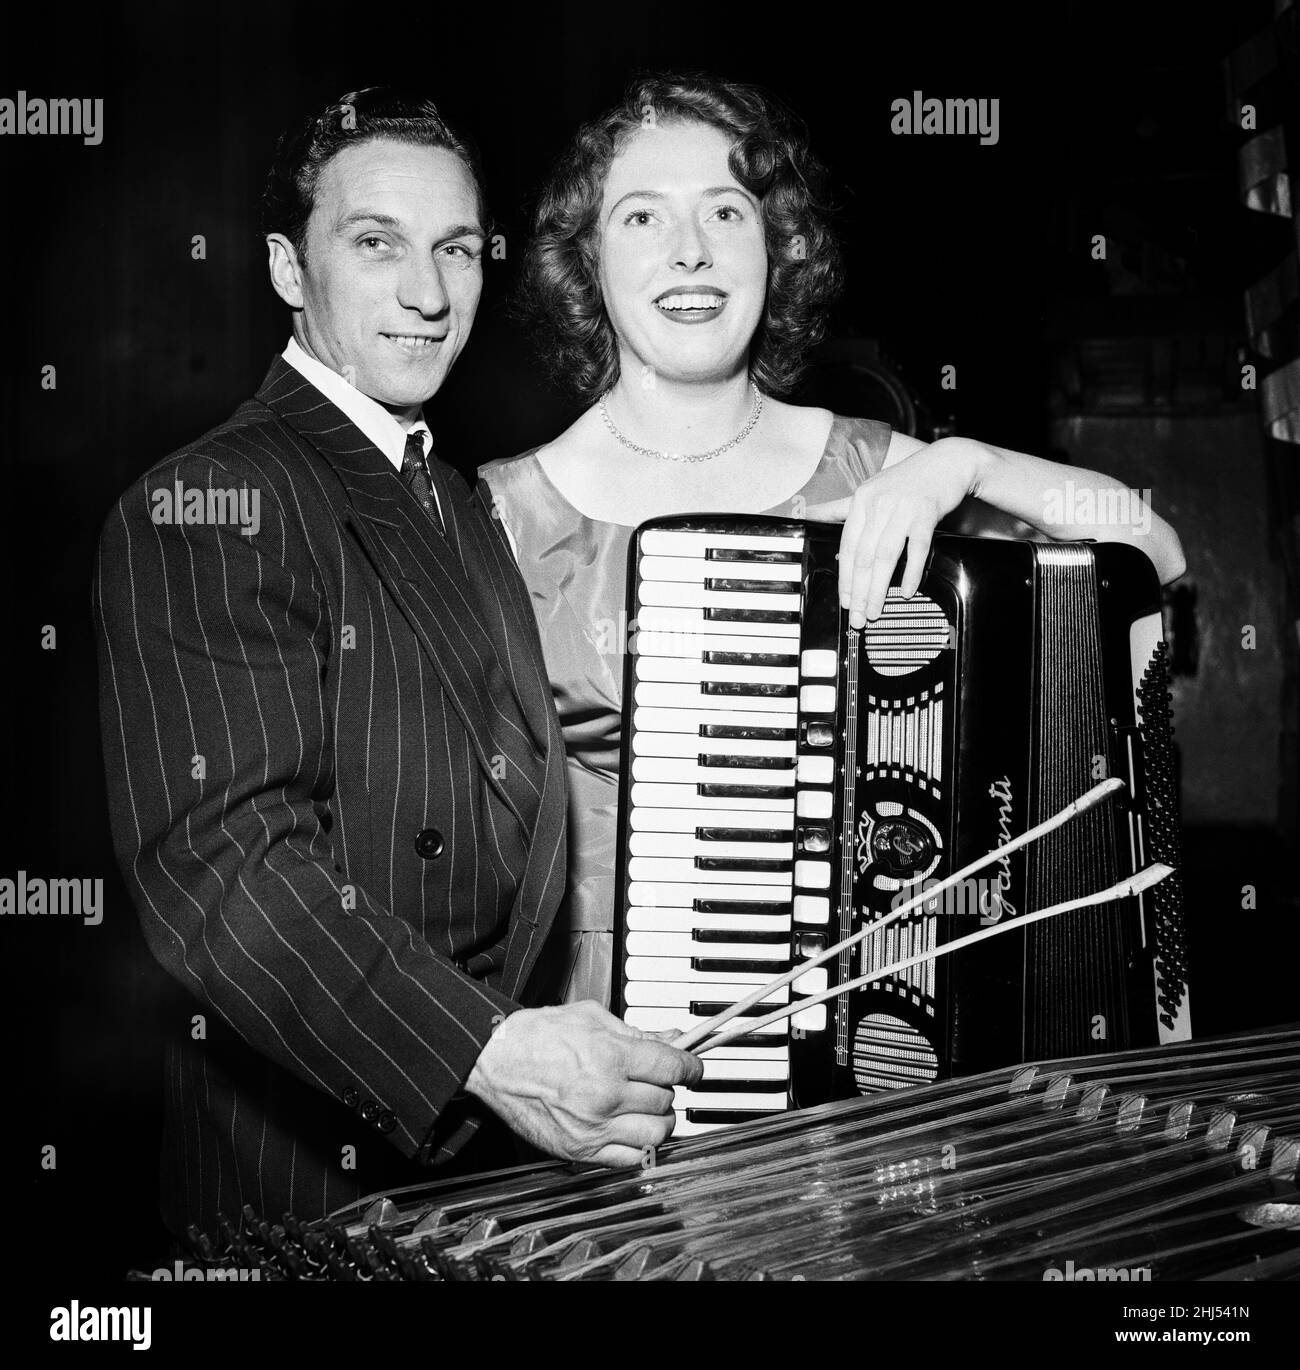 Opportunity Knocks, Winners, 11th October 1956. Arthur Cooper, Lorry driver from Essex, who plays the Dulcimer, and Phyllis Gillingham, Secretary from Twickenham who plays the Accordion. They have won a trip to the United States to play and be seen on Lou Goldberg's regional amateur hour, syndicated to over 100 stations in America. Stock Photo